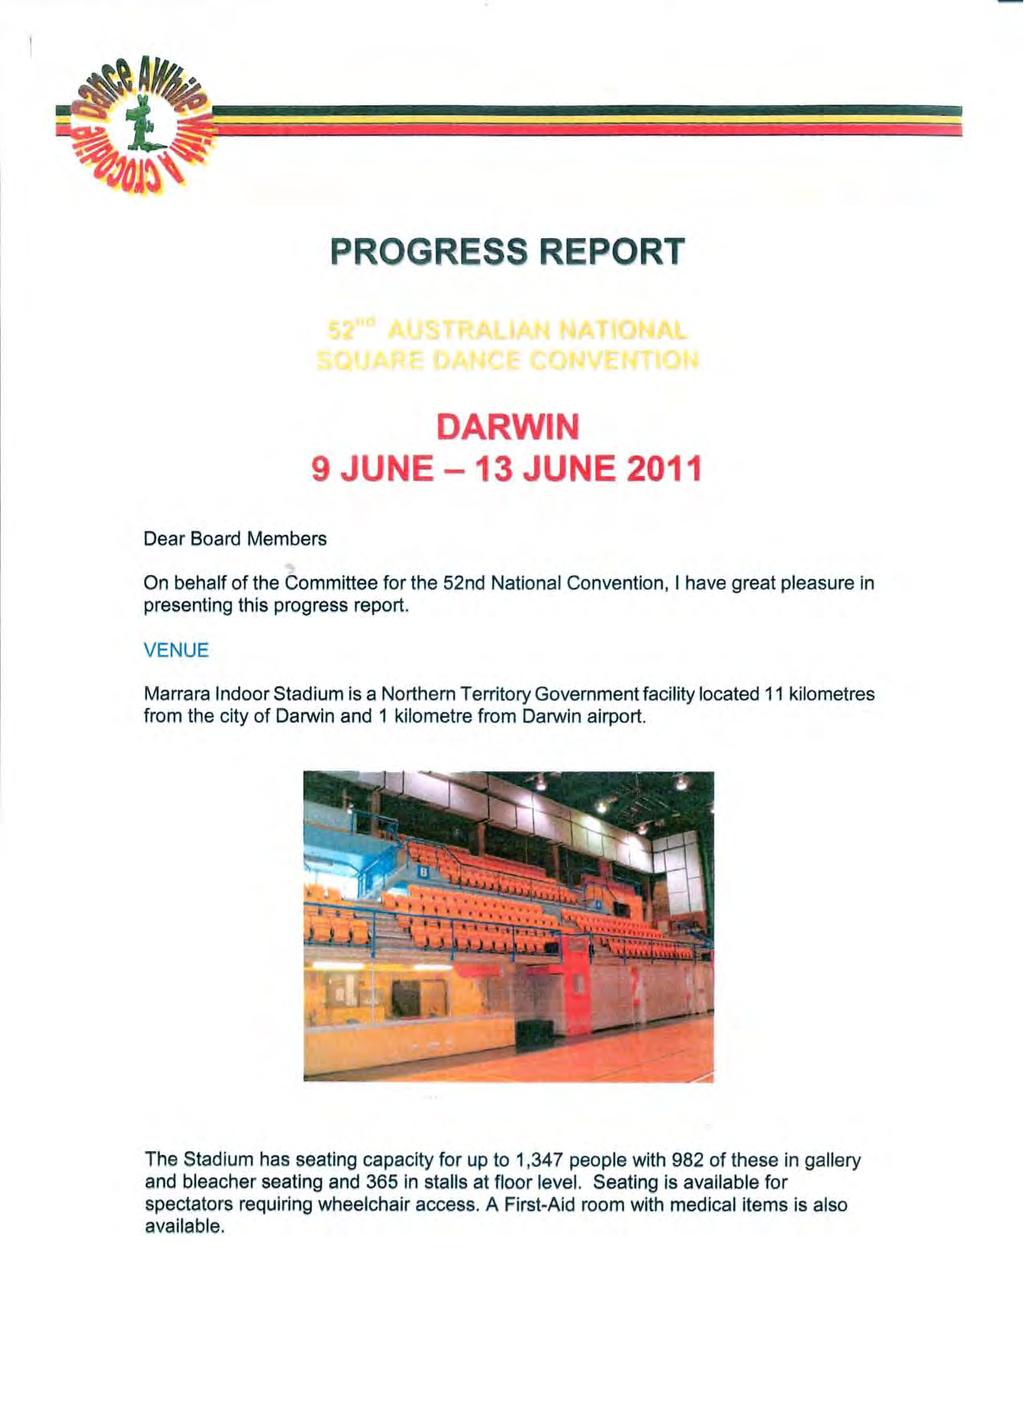 PROGRESS REPORT DARWIN 9 JUNE -13 JUNE 2011 Dear Board Members On behalf of the Committee for the 52nd National Convention, I have great pleasure in presenting this progress report.